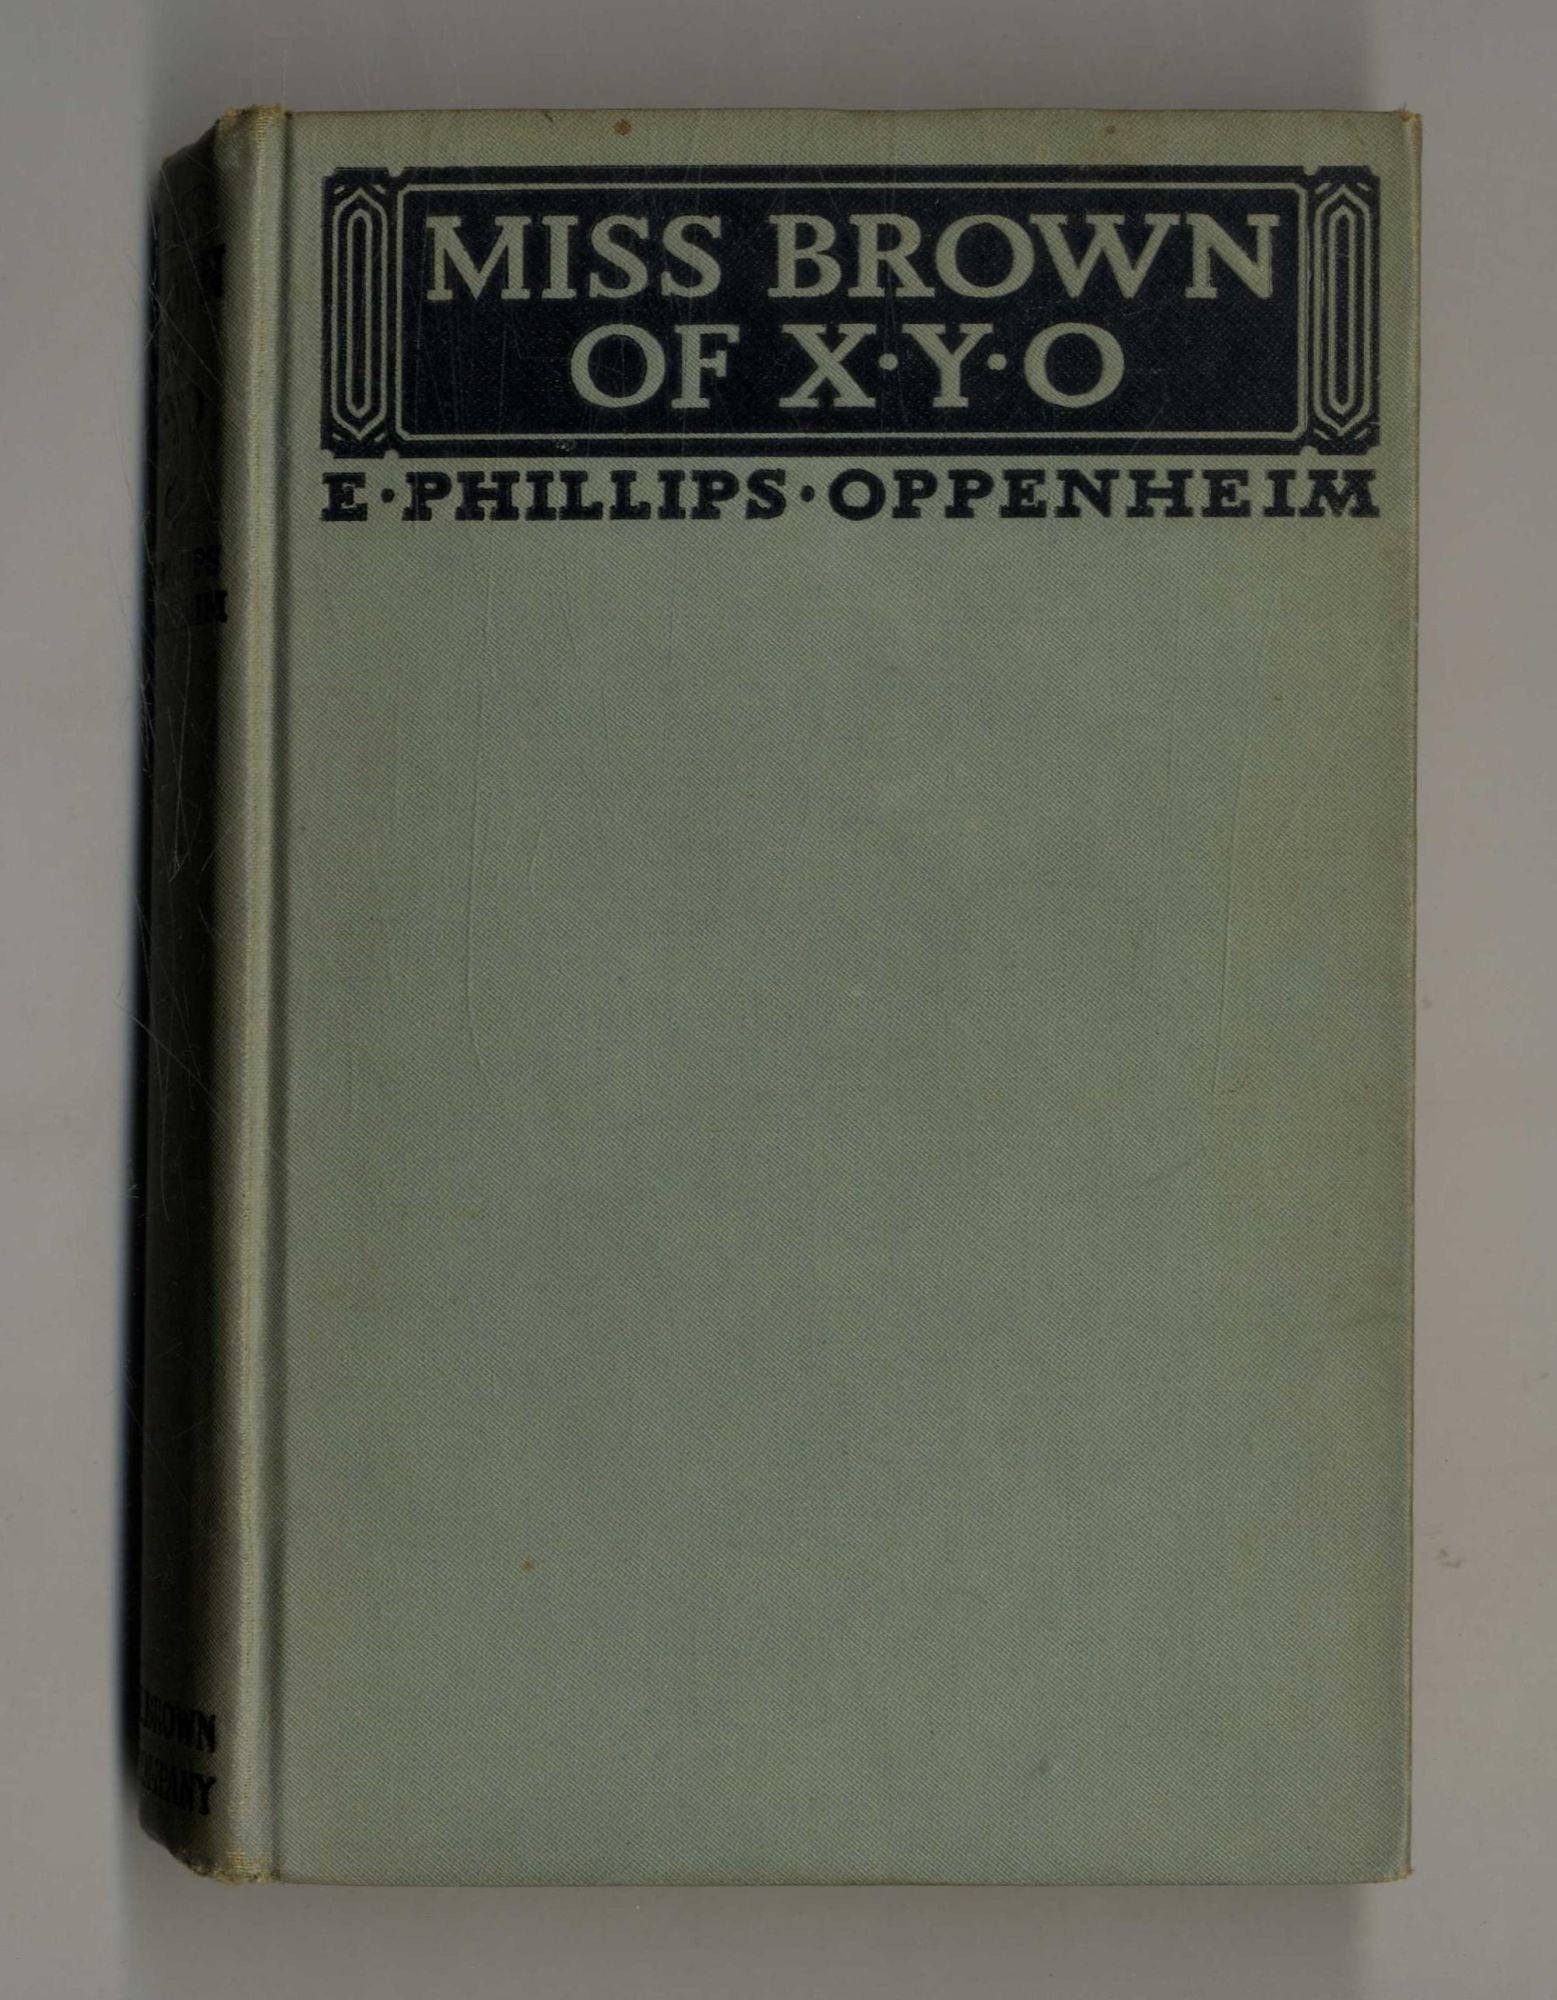 Book #160082 Miss Brown of X. Y. O. E. Phillips Oppenheim.